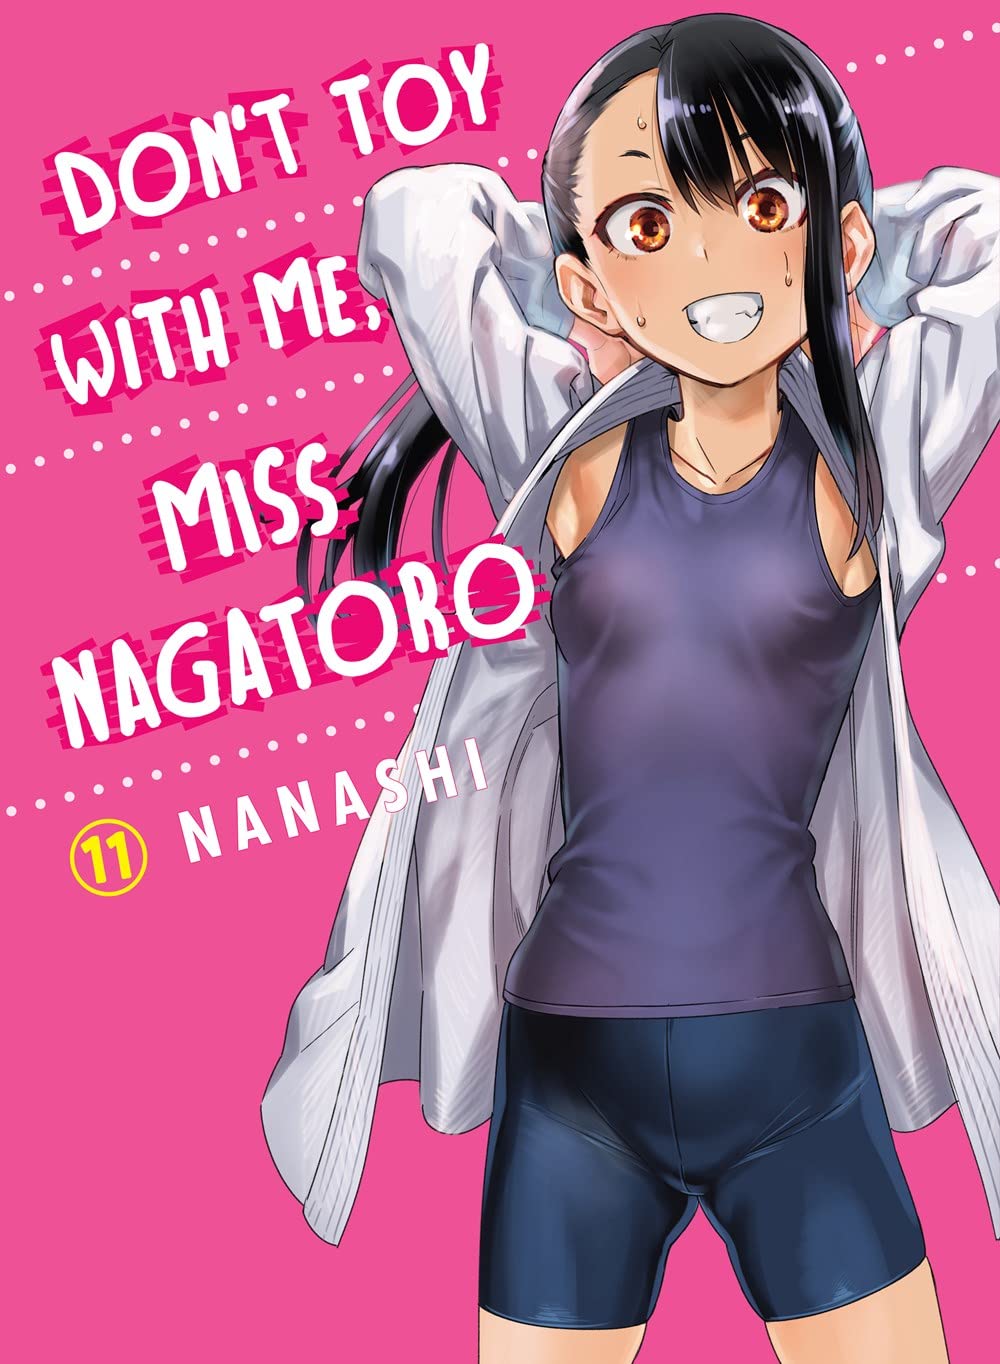 Don't Toy with me, Miss Nagatoro Vol. 11